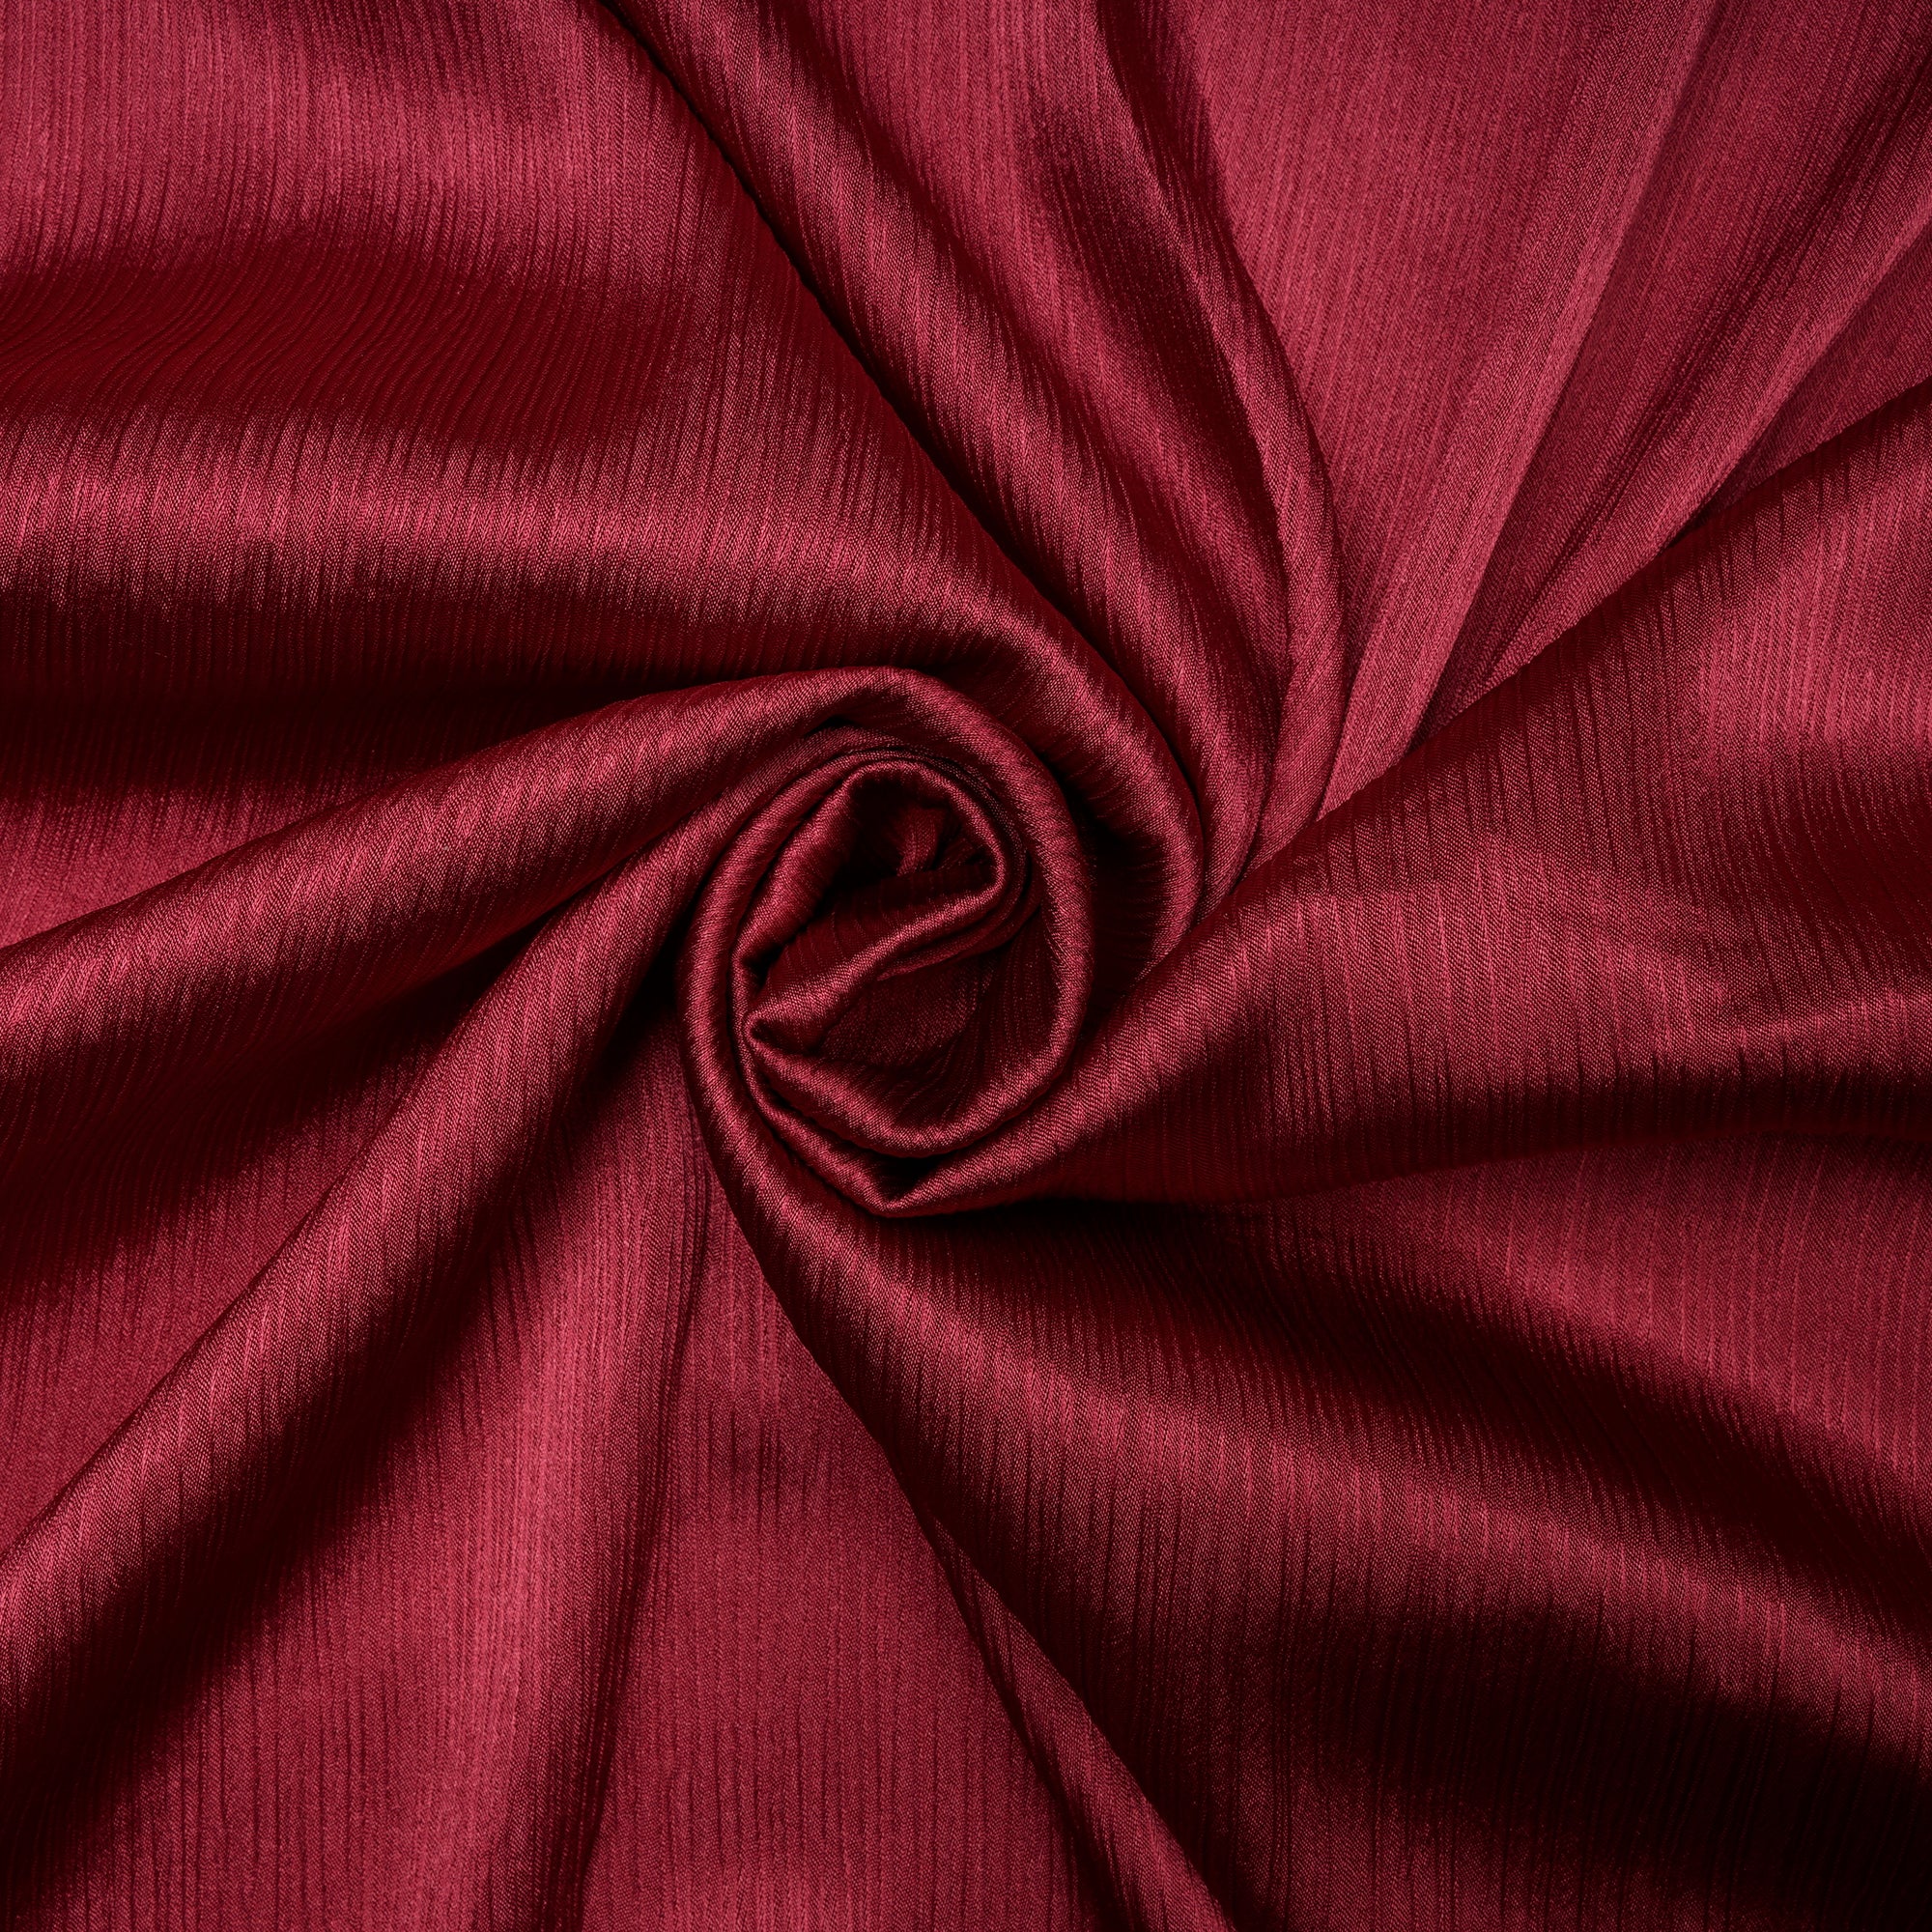 Cerise Imported Crinkled Satin Fabric (60" Wide)